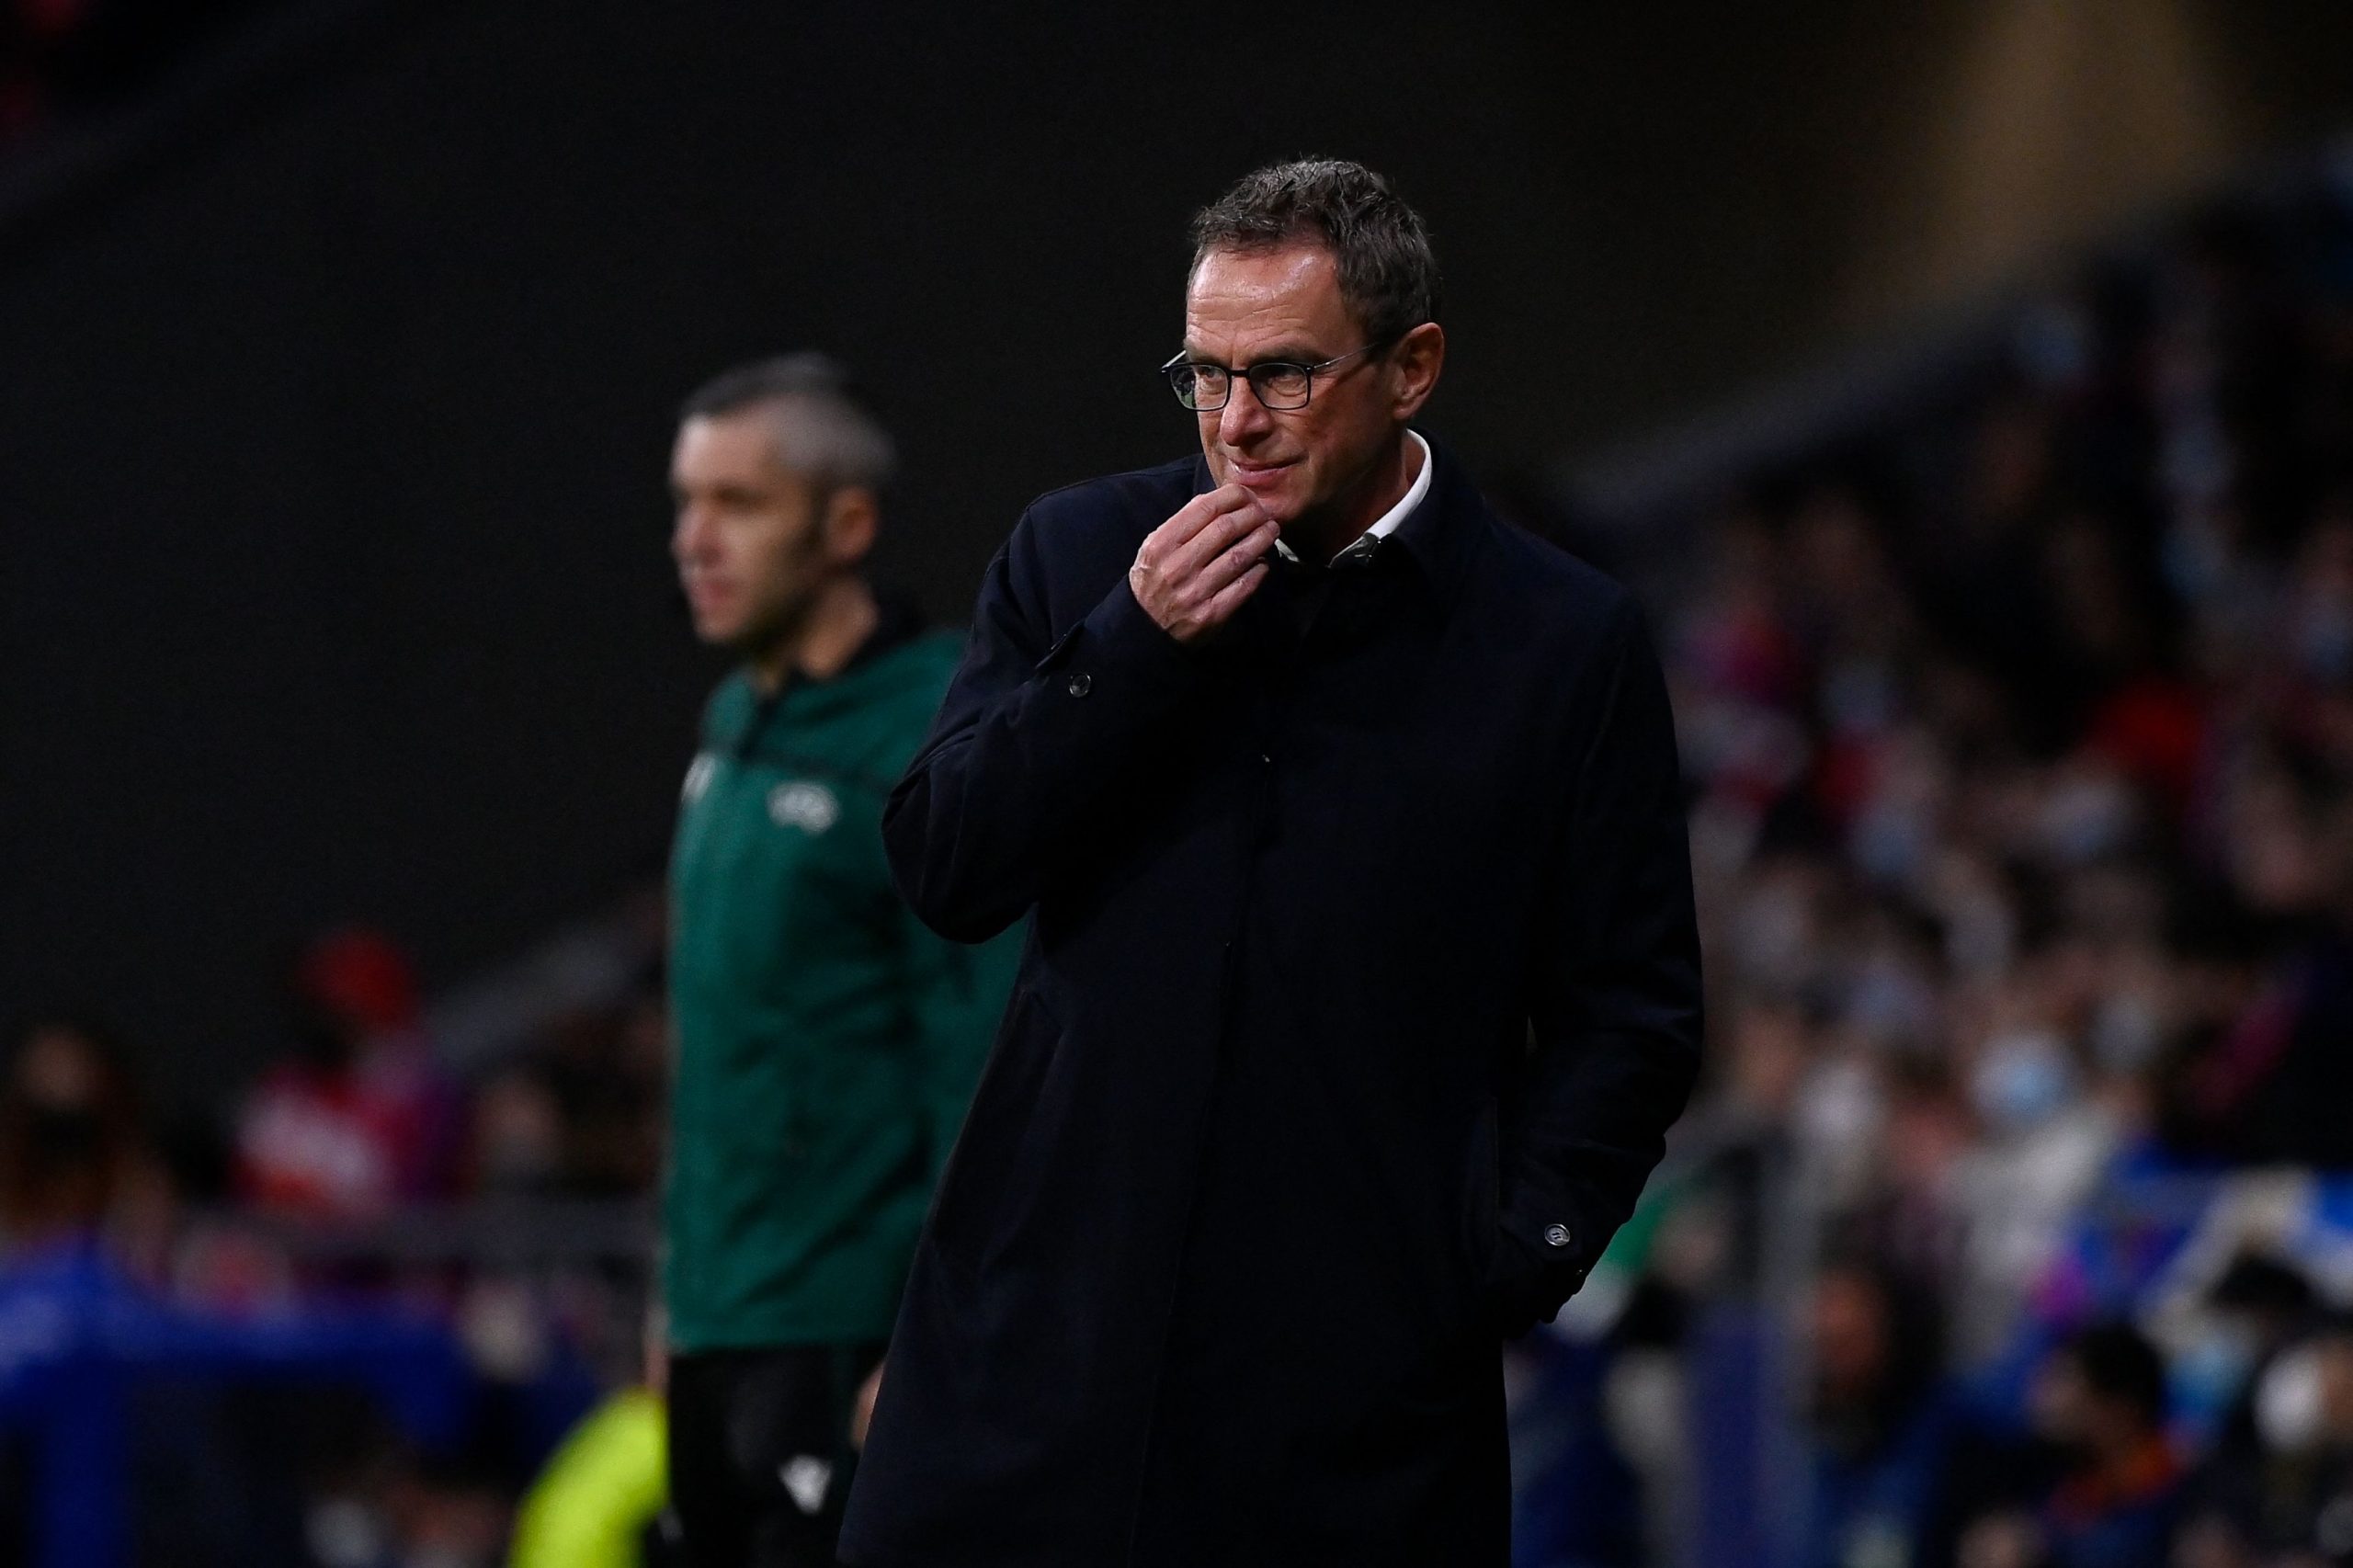 Ralf Rangnick is now the manager of Austria. (Photo by OSCAR DEL POZO/AFP via Getty Images)